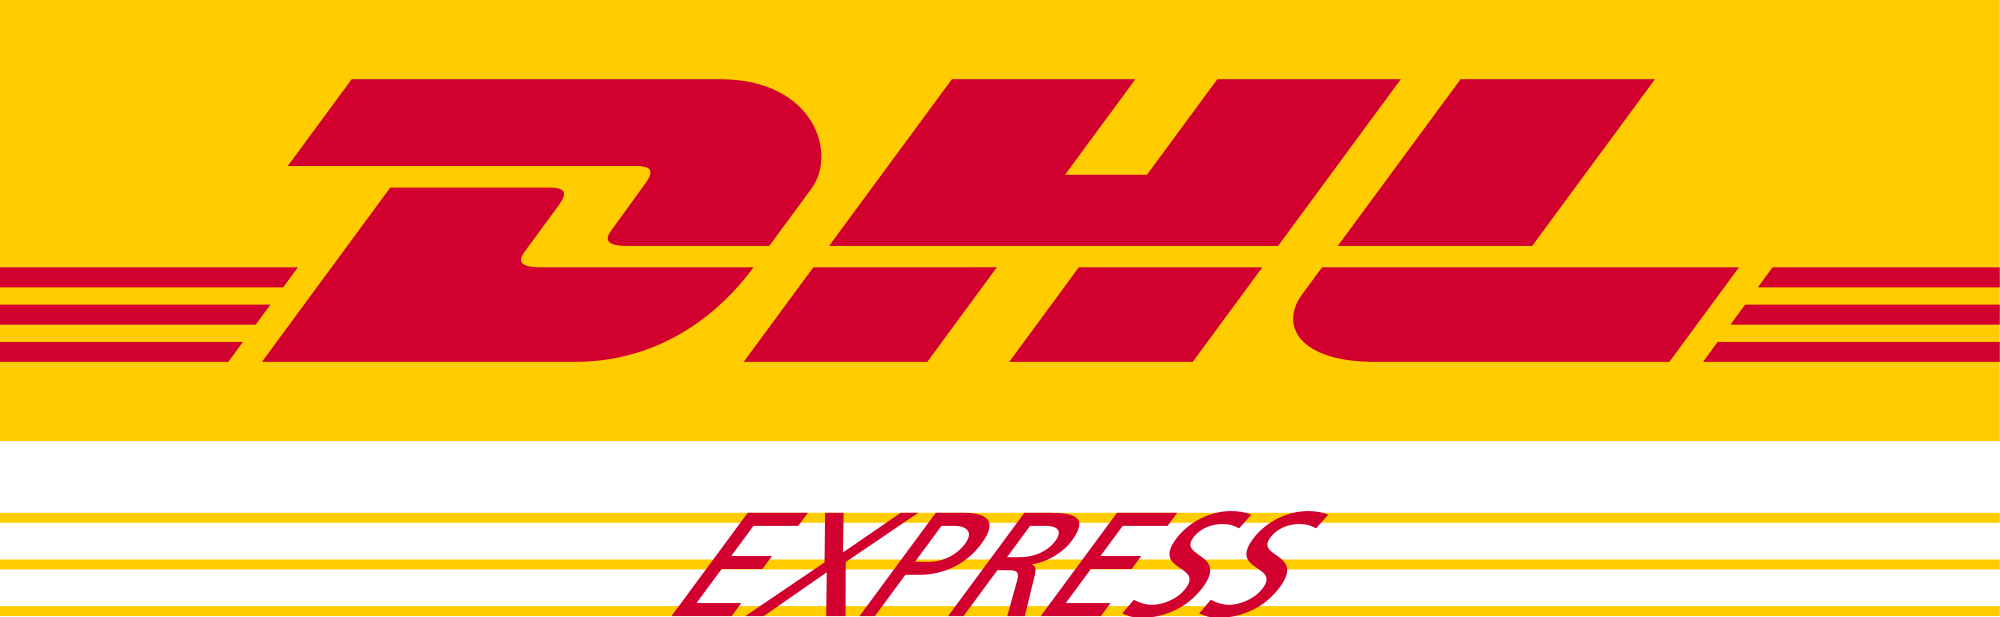 DHL Worldwide Express Logo - DHL Express | eCommerce Show North